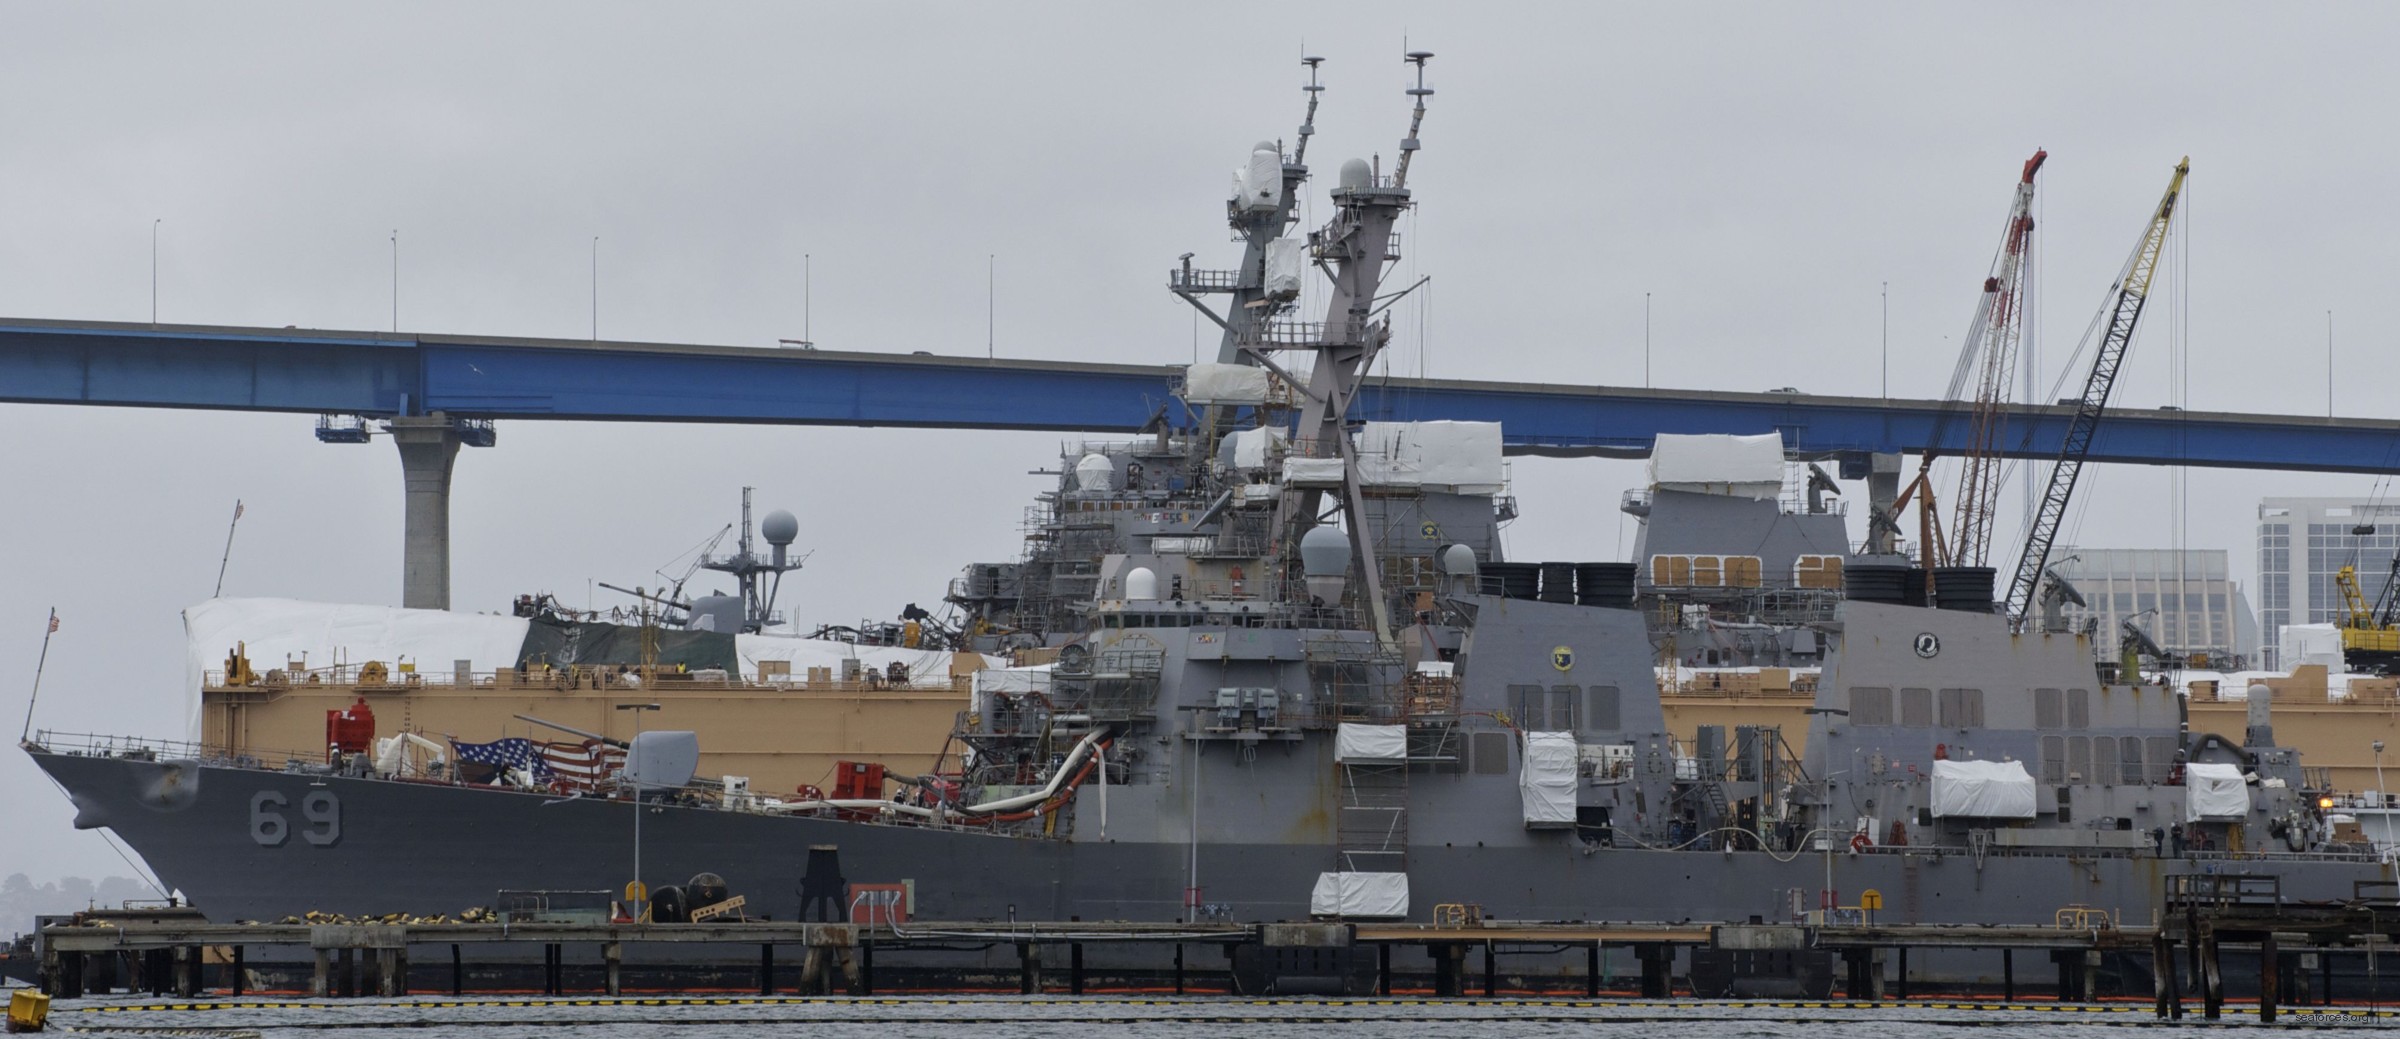 ddg-69 uss milius guided missile destroyer arleigh burke class aegis bmd 27